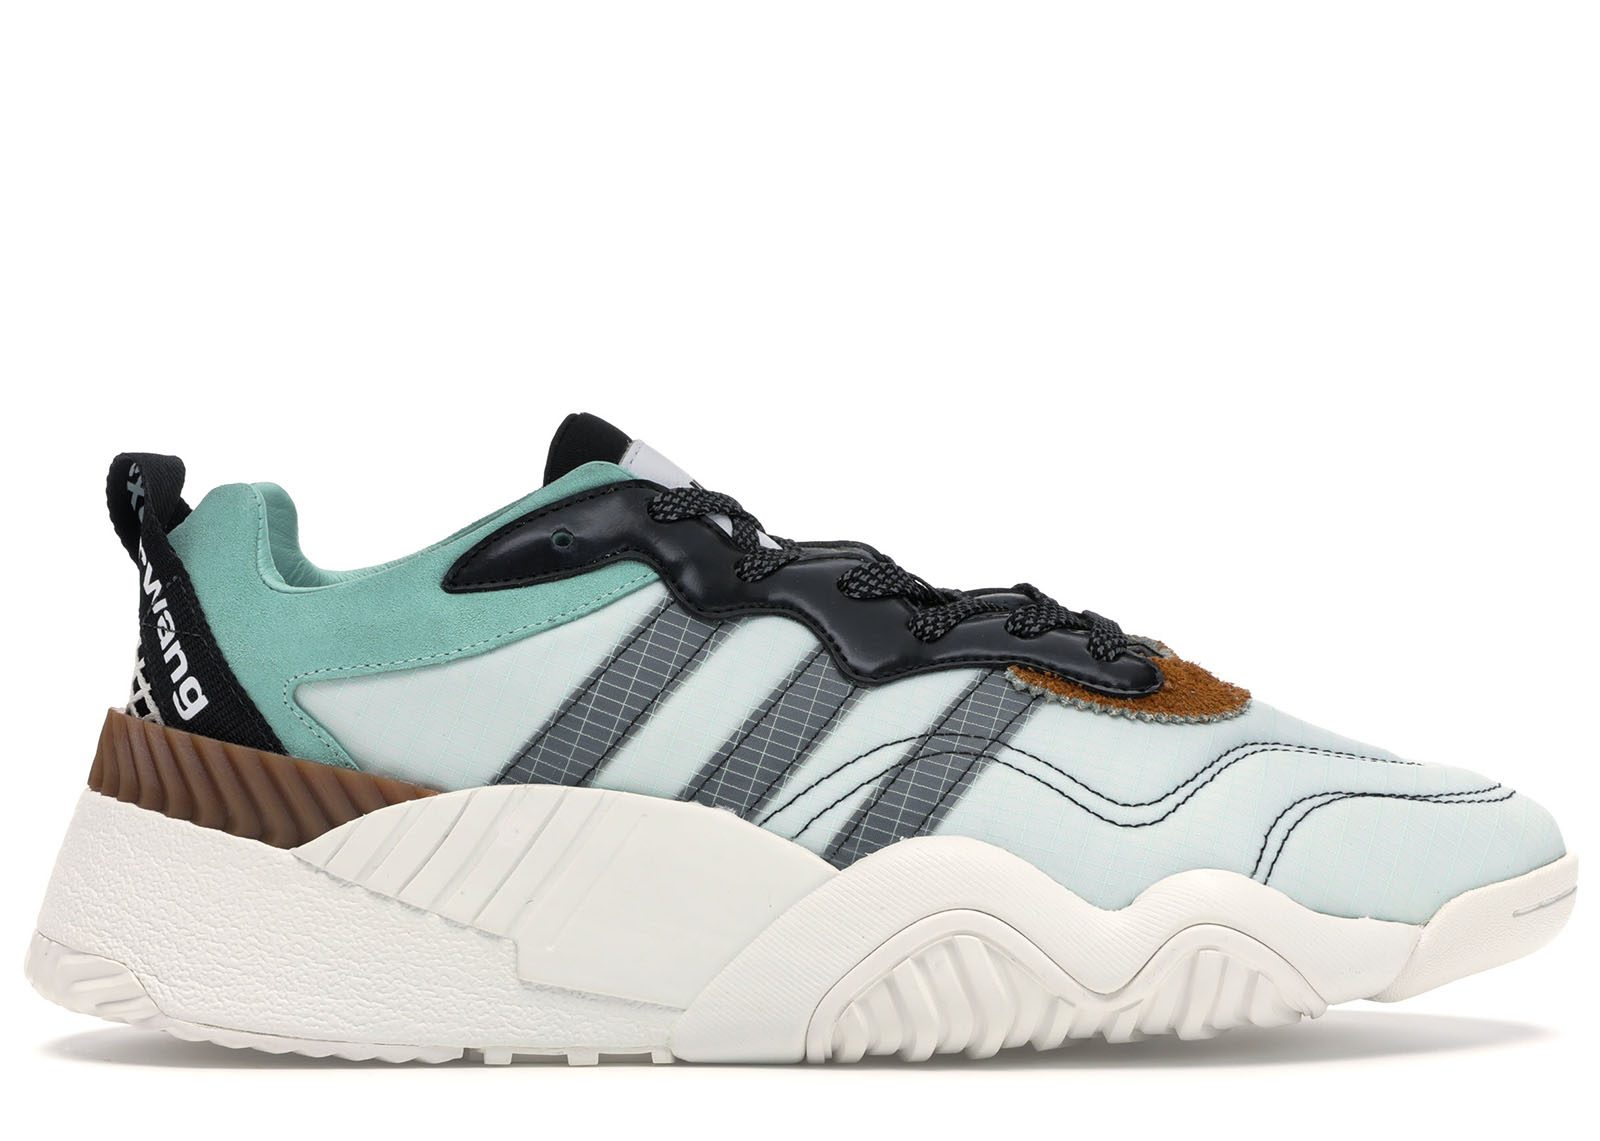 ADIDAS AW TURNOUT TRAINER